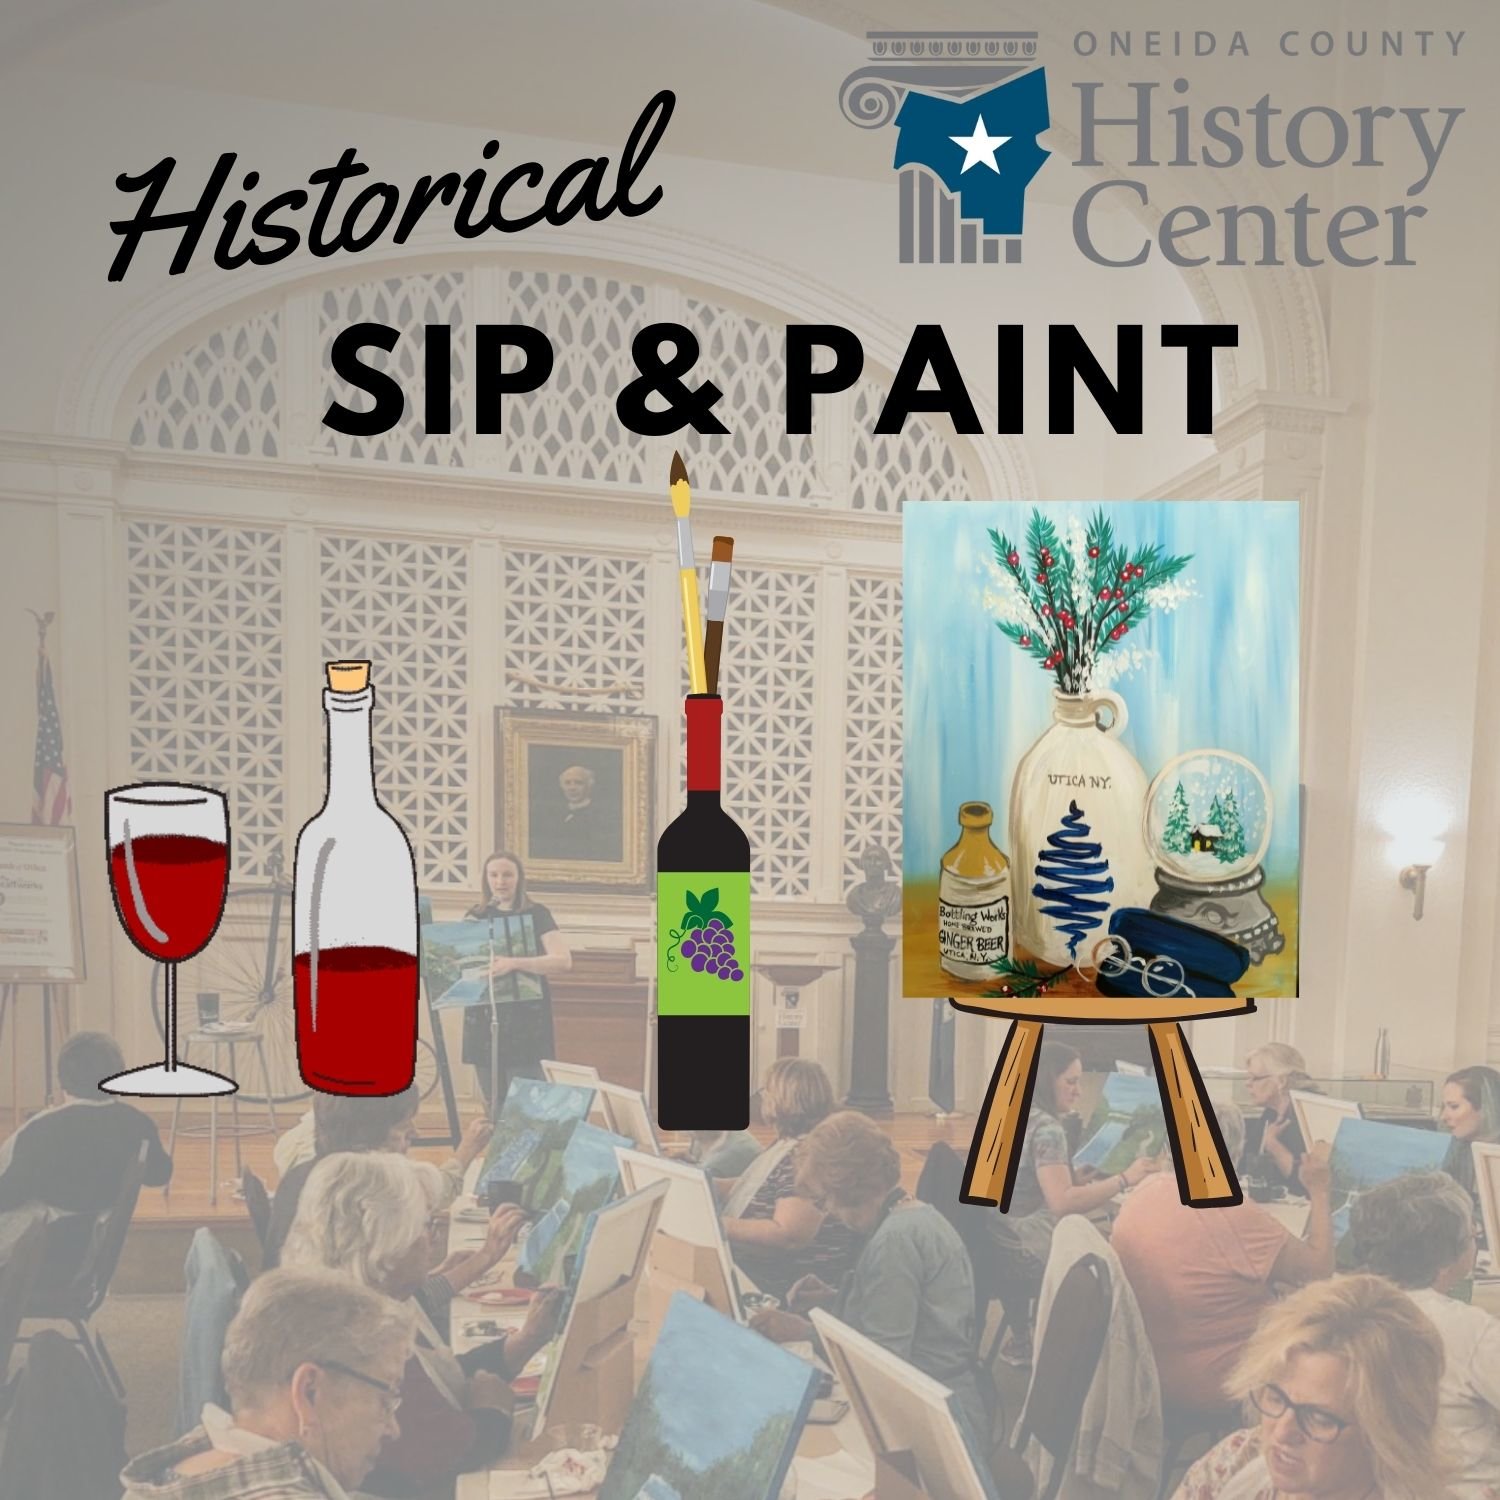 The Oneida County History Center hosts an Historical Sip and Paint from 1 to 3 p.m. Nov. 19 in its exhibit gallery​​​​​​​ in Utica.